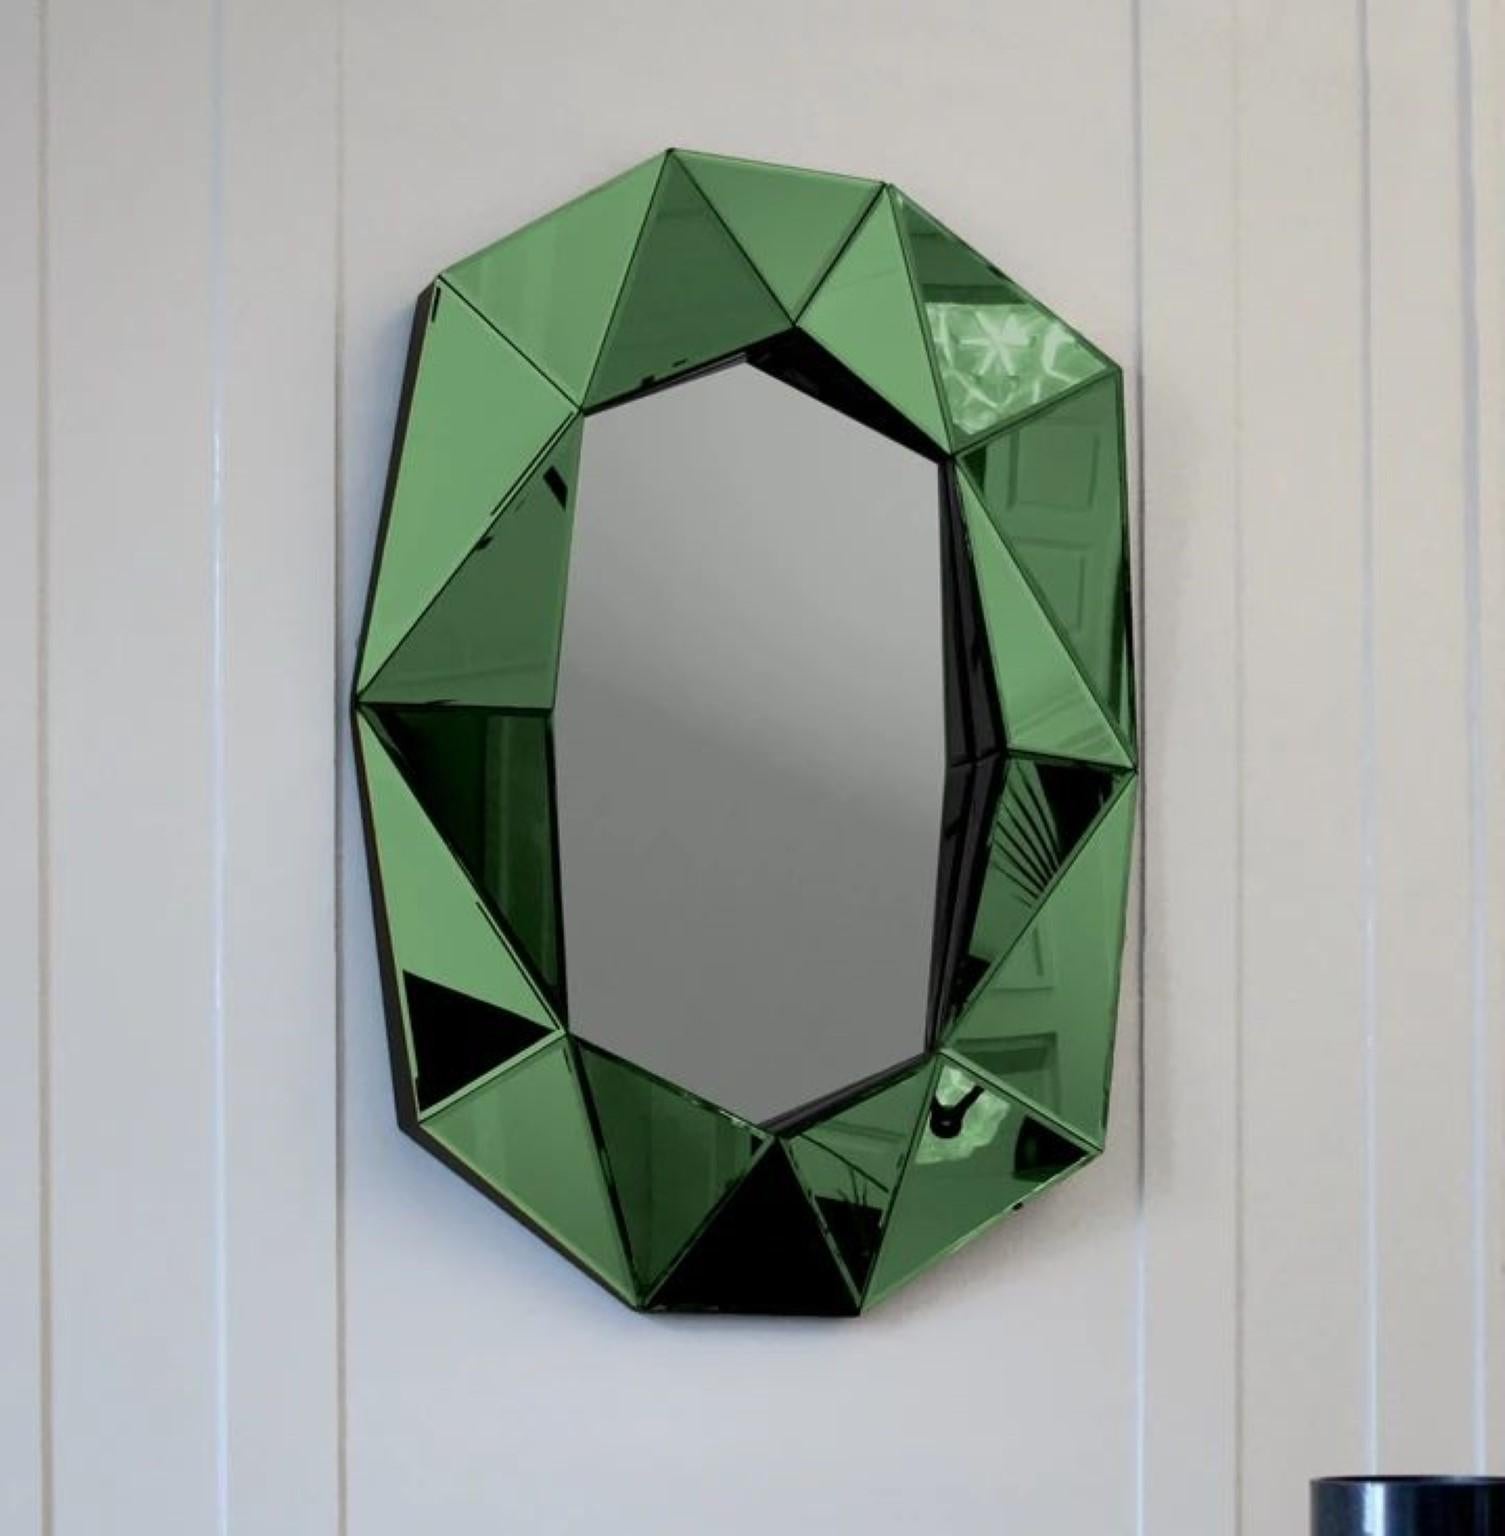 Diamond large mirror emerald
Dimensions: W 72 x D 6.2 x H 100 cm
Material: 4 mm faceted mirror on black painted MDF
Weight: 12.8 kg

The Diamond large mirror illustrates a perfect combination of function and art. This unique mirror is inspired